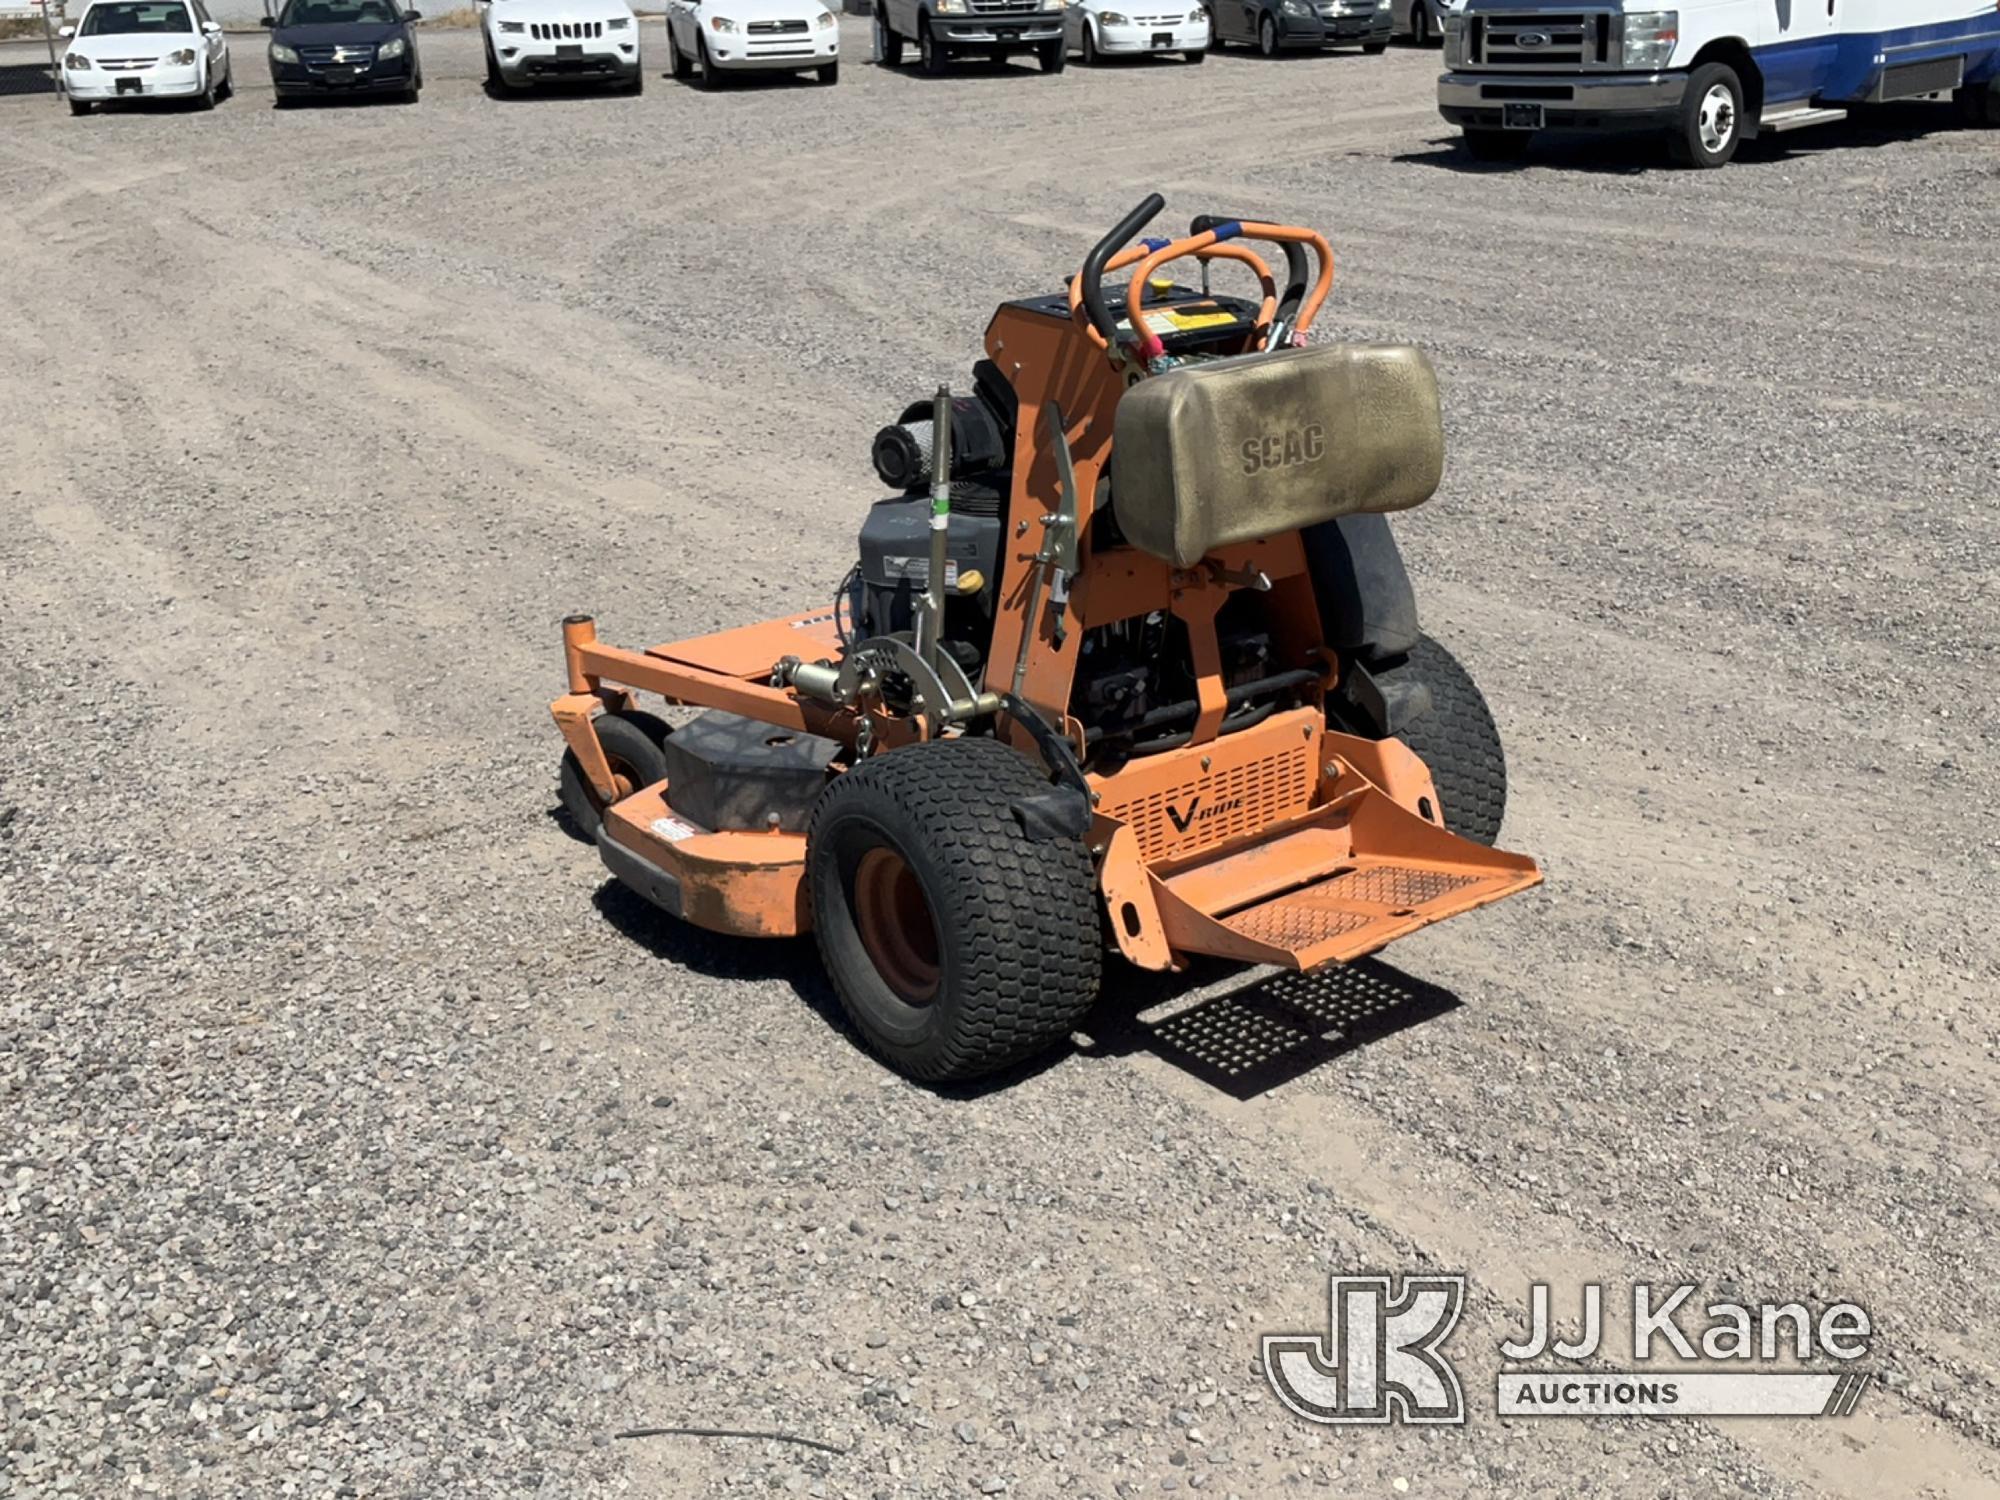 (Tracy-Clark, NV) 2016 Scag V-Ride Zero Turn Riding Mower Condition Unkown, No Key, Missing S/N Plac